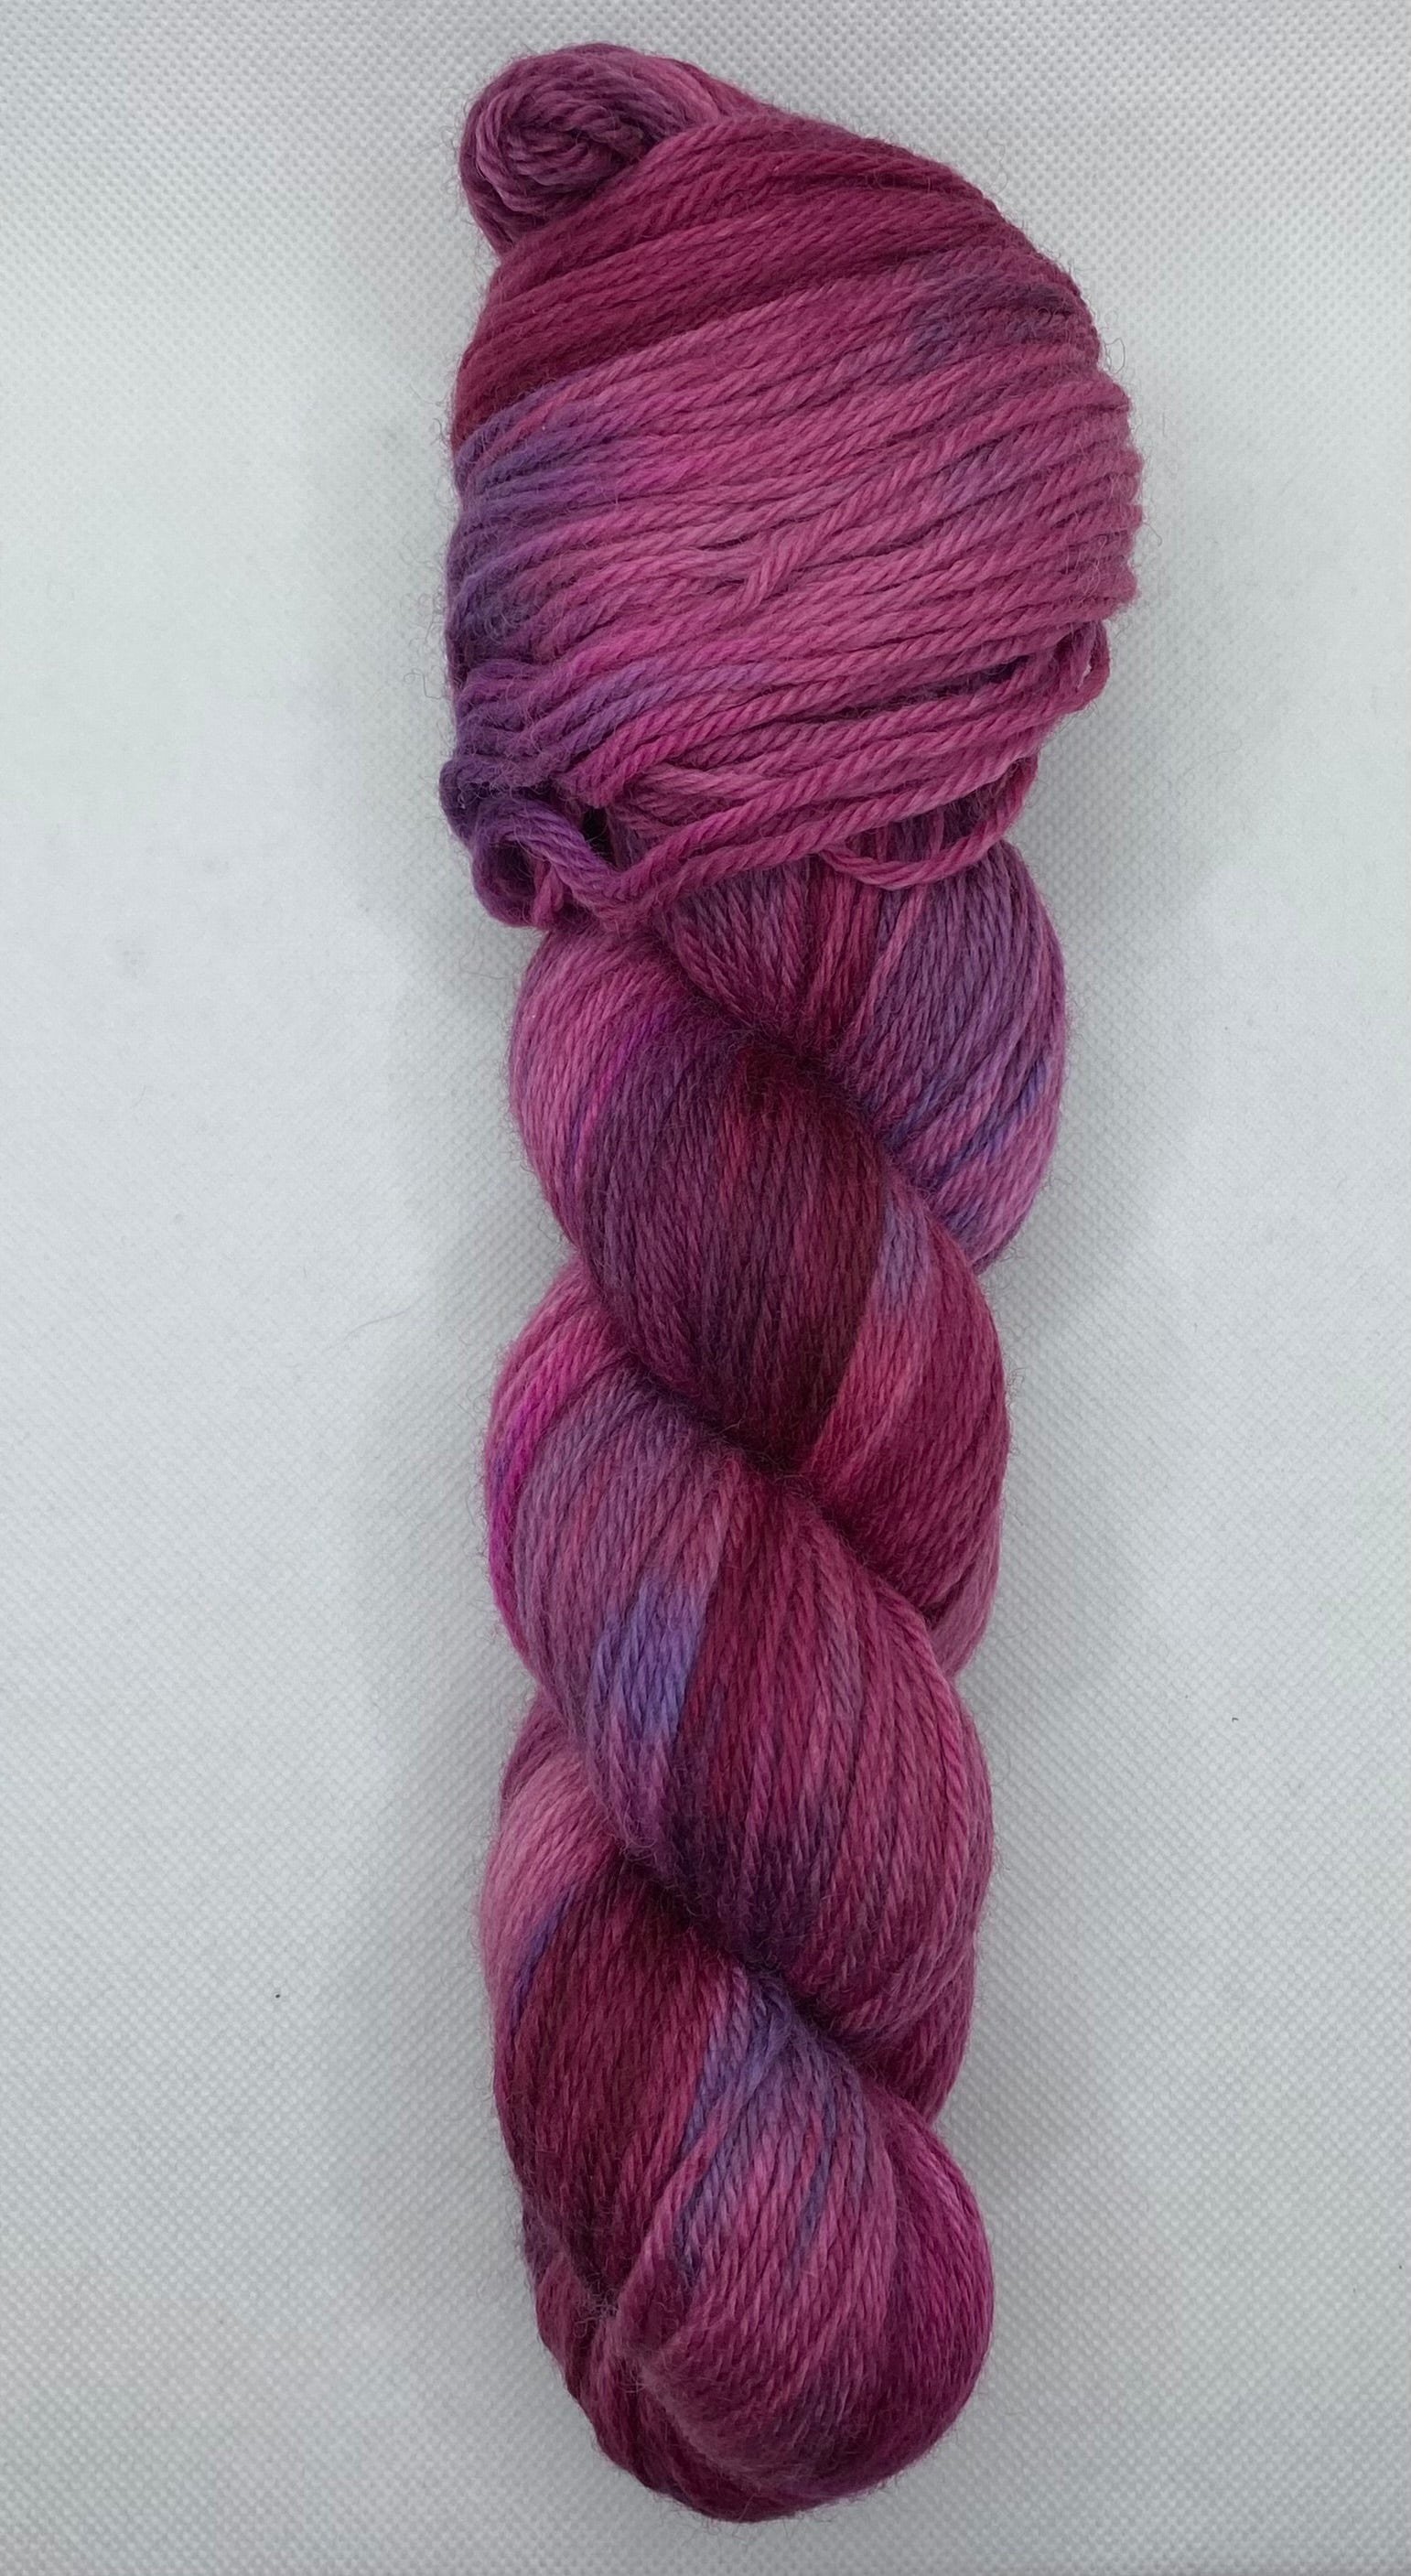 “I Was Reborn a Witch” Leftover Hand Dyed Yarn